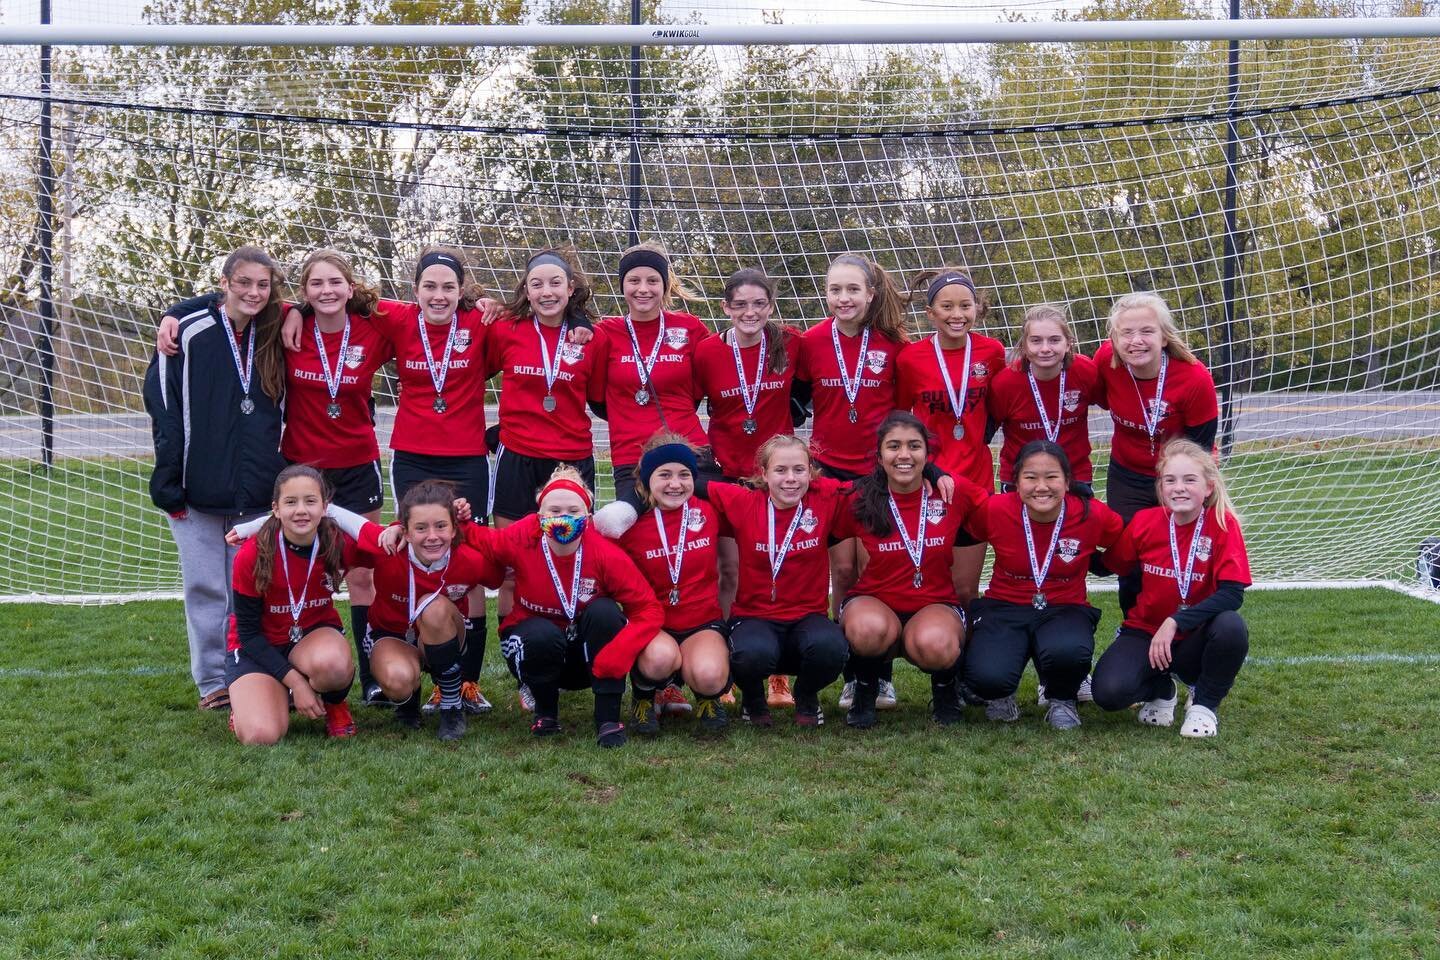 Congratulations to the U15 Girls for finishing finalists in the Haunted Classic last weekend and the Fall Finale this weekend! Two great weeks of Fury soccer.